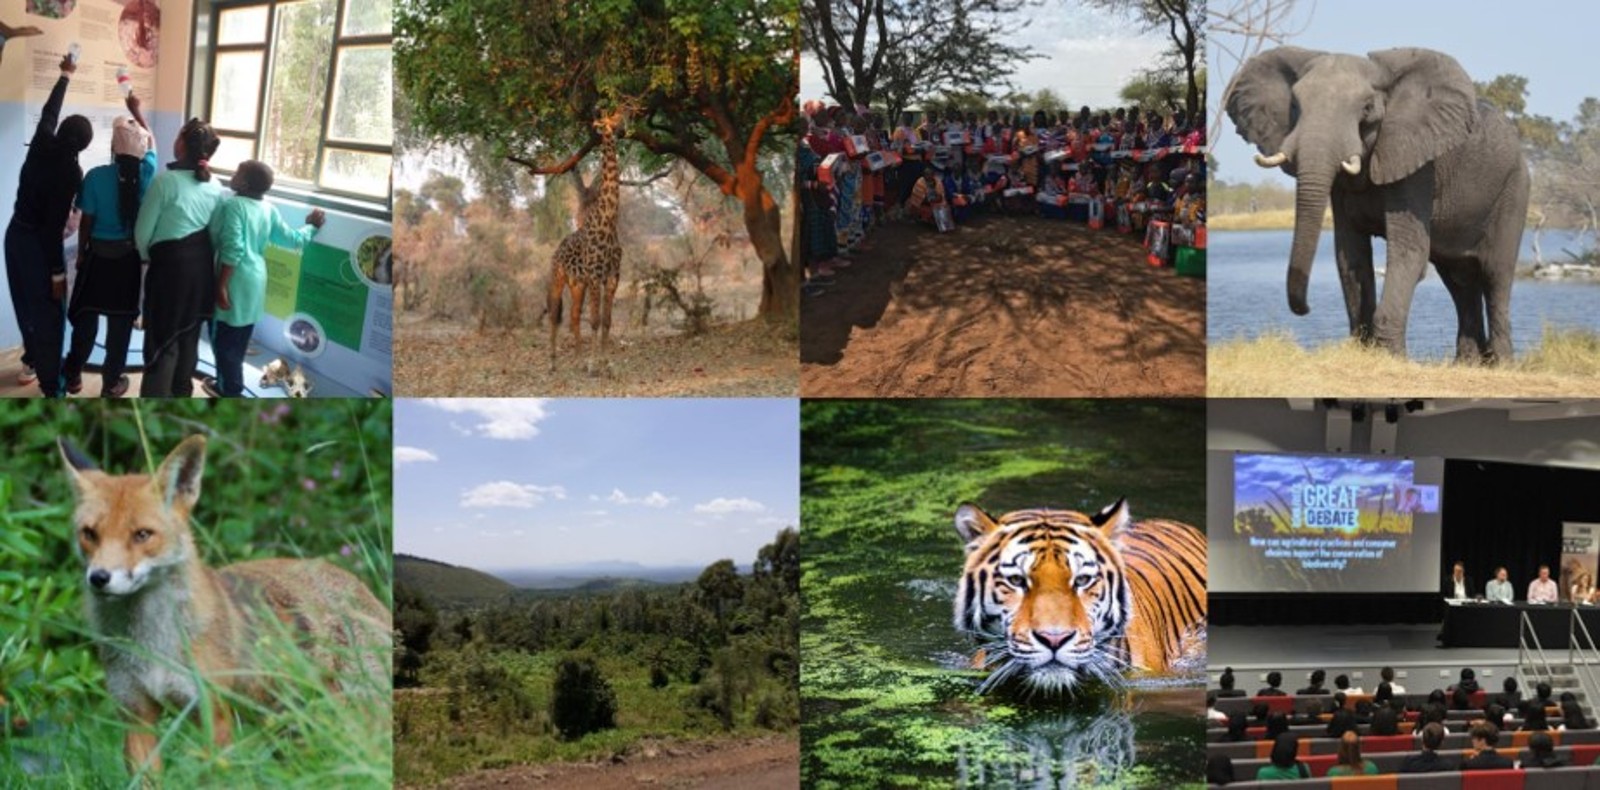 A montage of images including wild animals and people in an educational setting